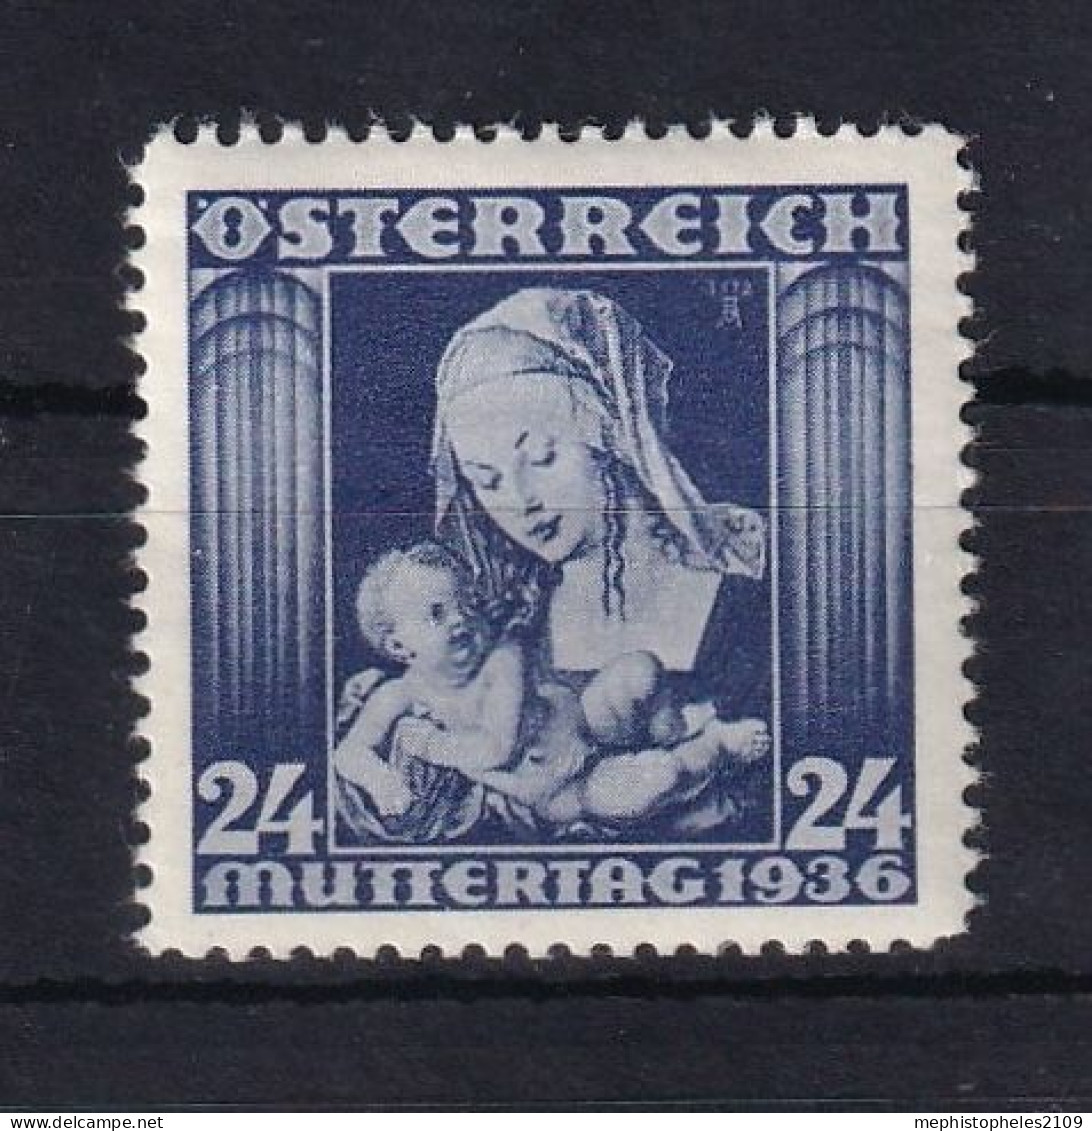 AUSTRIA 1936 - MNH - ANK 627 - Muttertag - Used Stamps